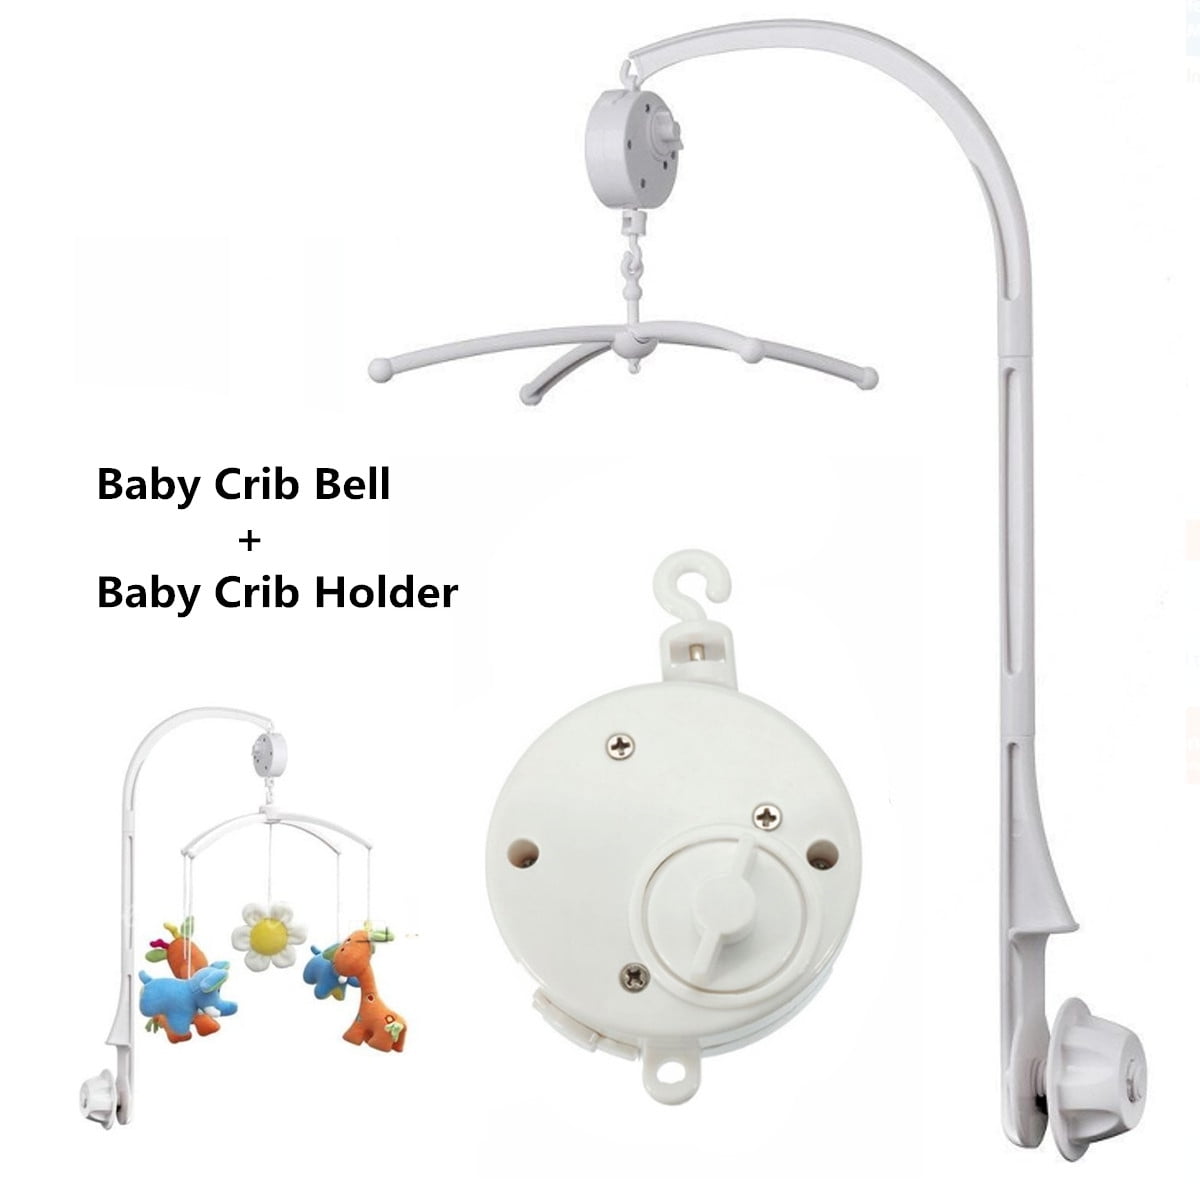 Baby Crib Mobile Bed Bell Holder Arm Bracket Battery-operated Musical Mobile Box 